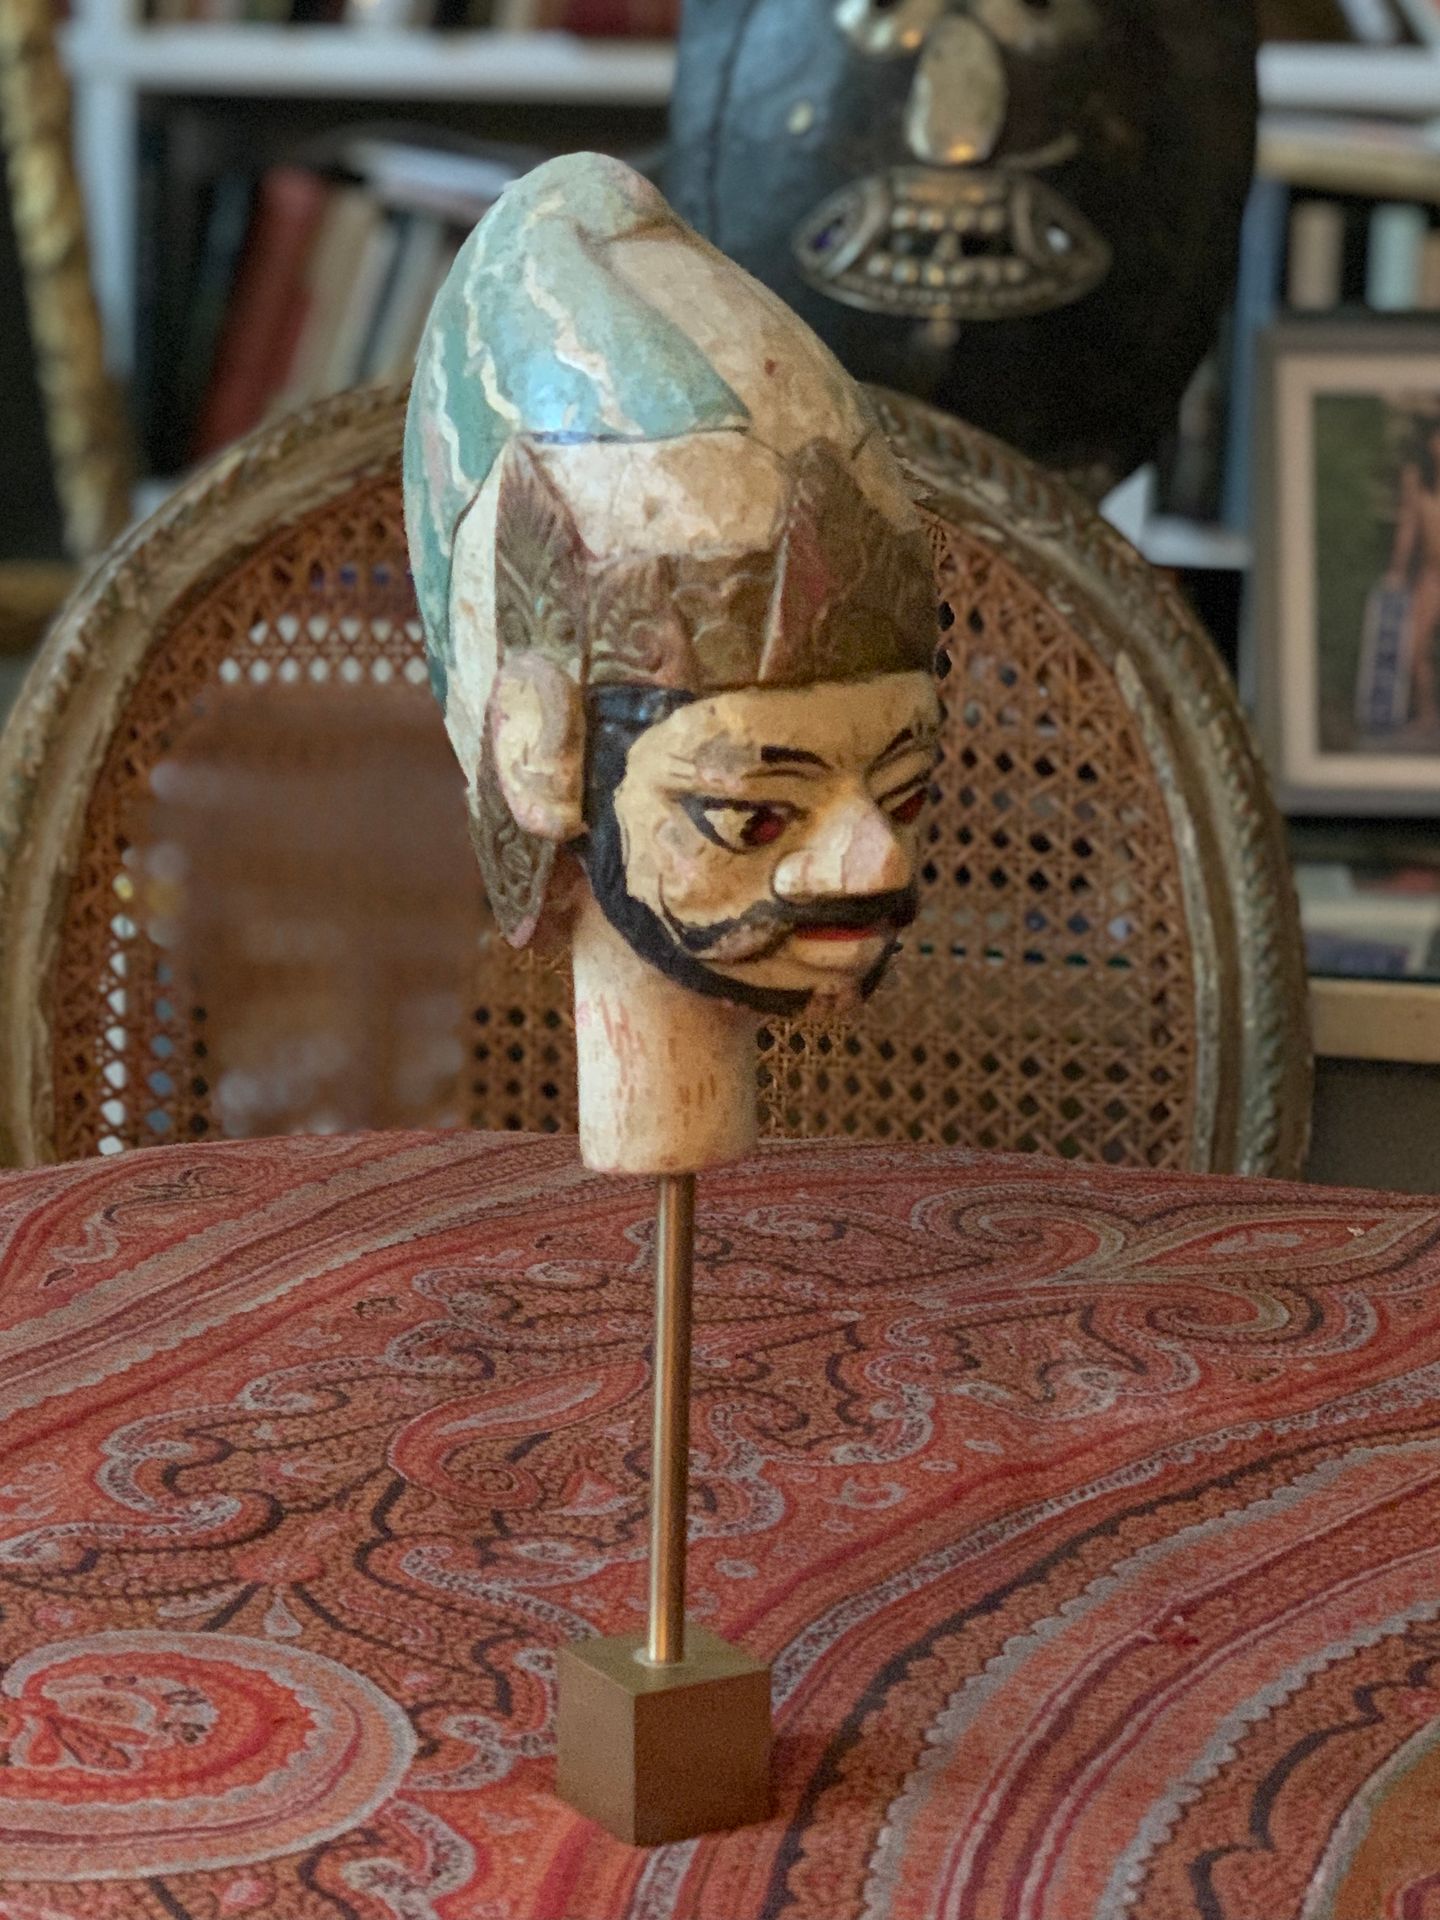 Null Puppet head representing a bearded man in polychrome carved wood

Bali.

He&hellip;